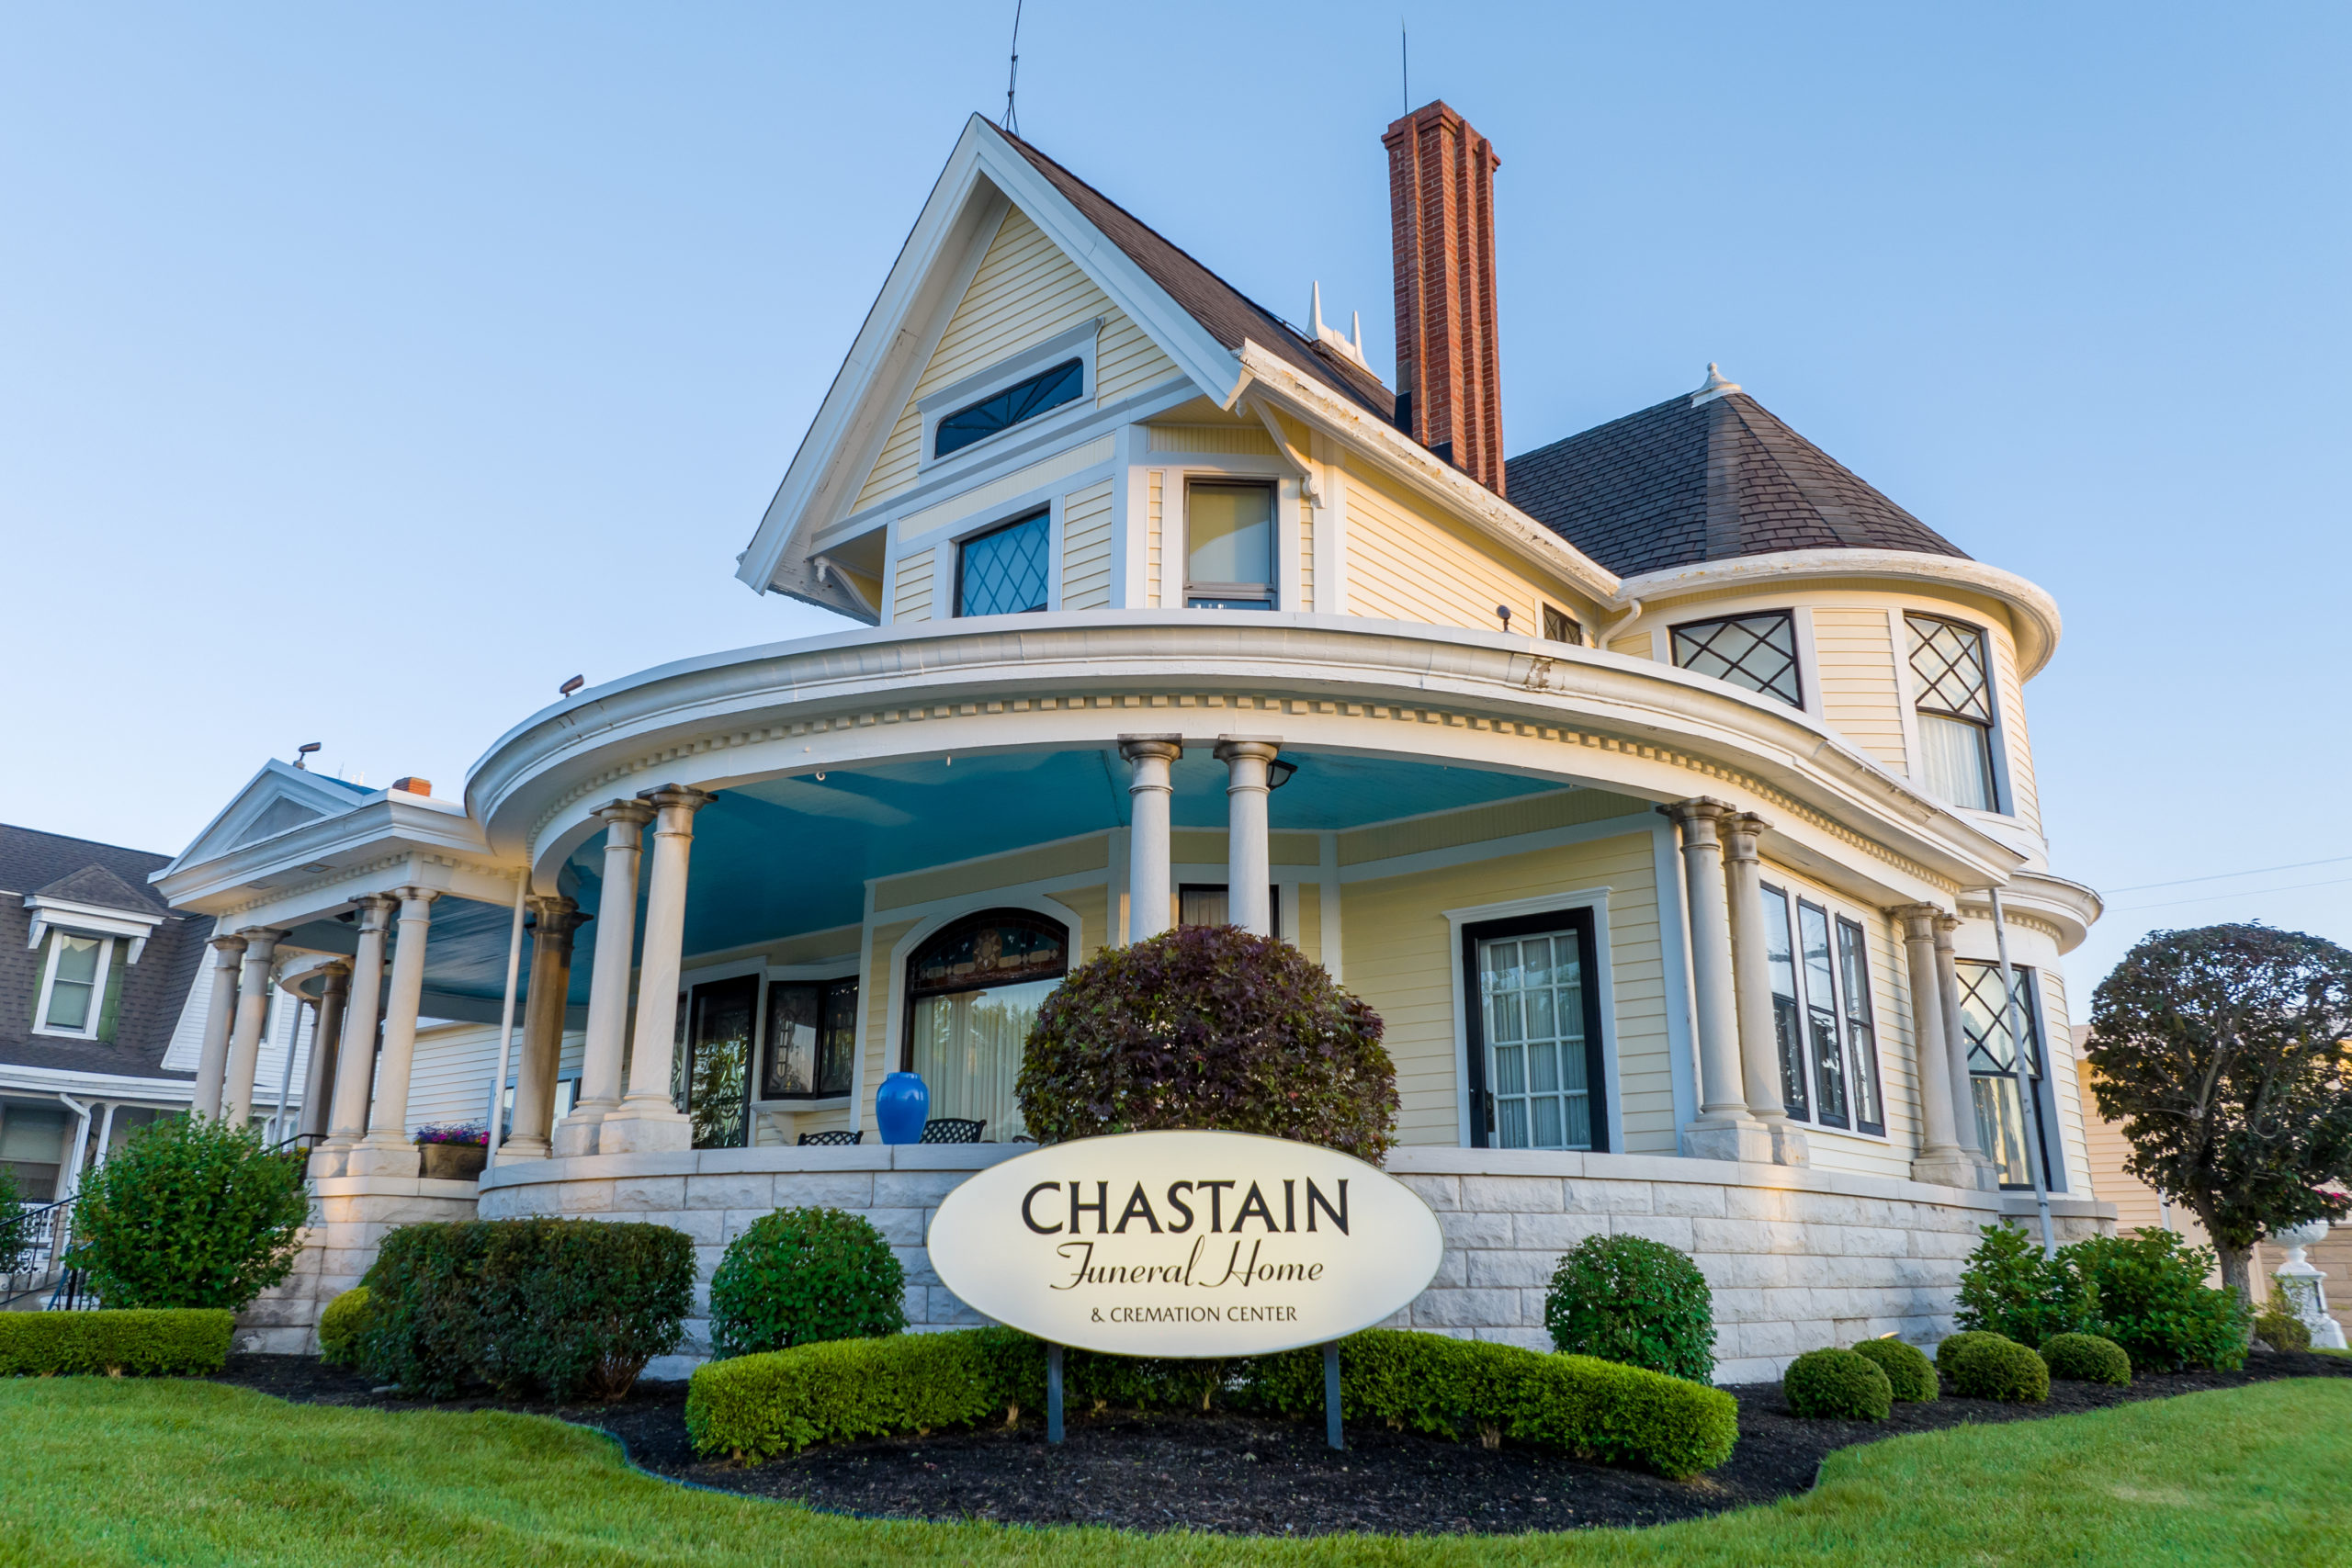 Chastain Funeral Home 812 849 2600